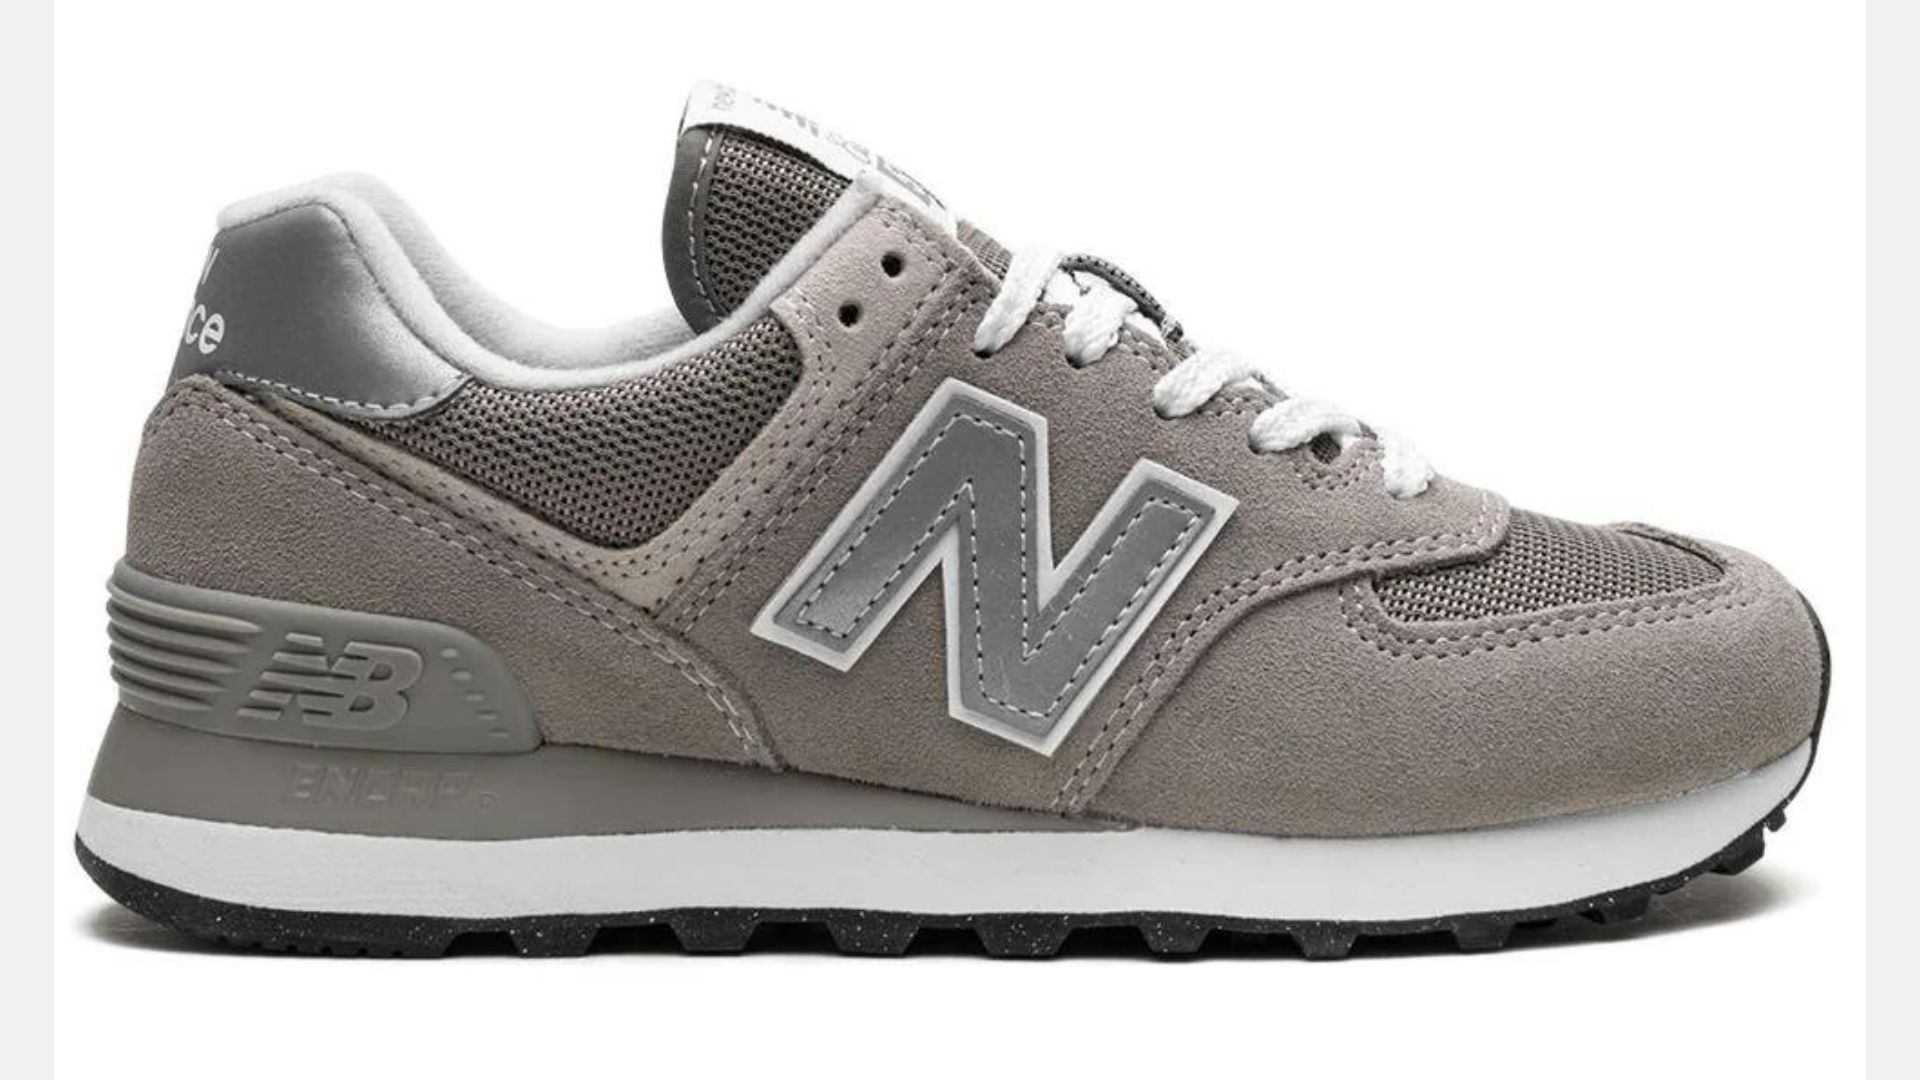 A pair of grey New Balance sneakers with a white sole - New Balance